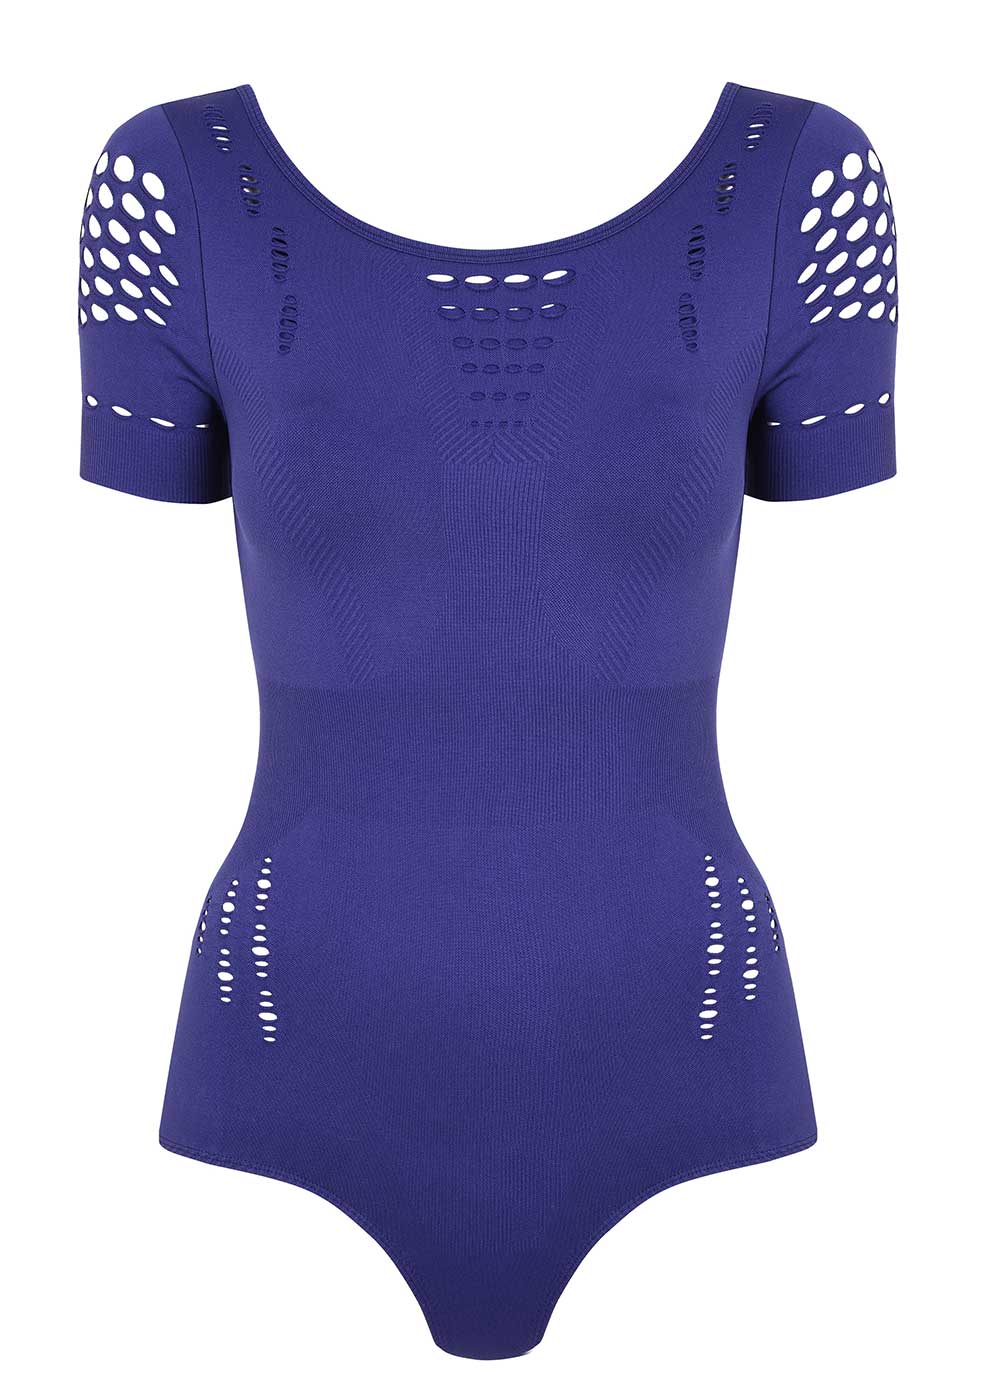 Laser cut bodysuit by Ivy Park, $95 from Topshop